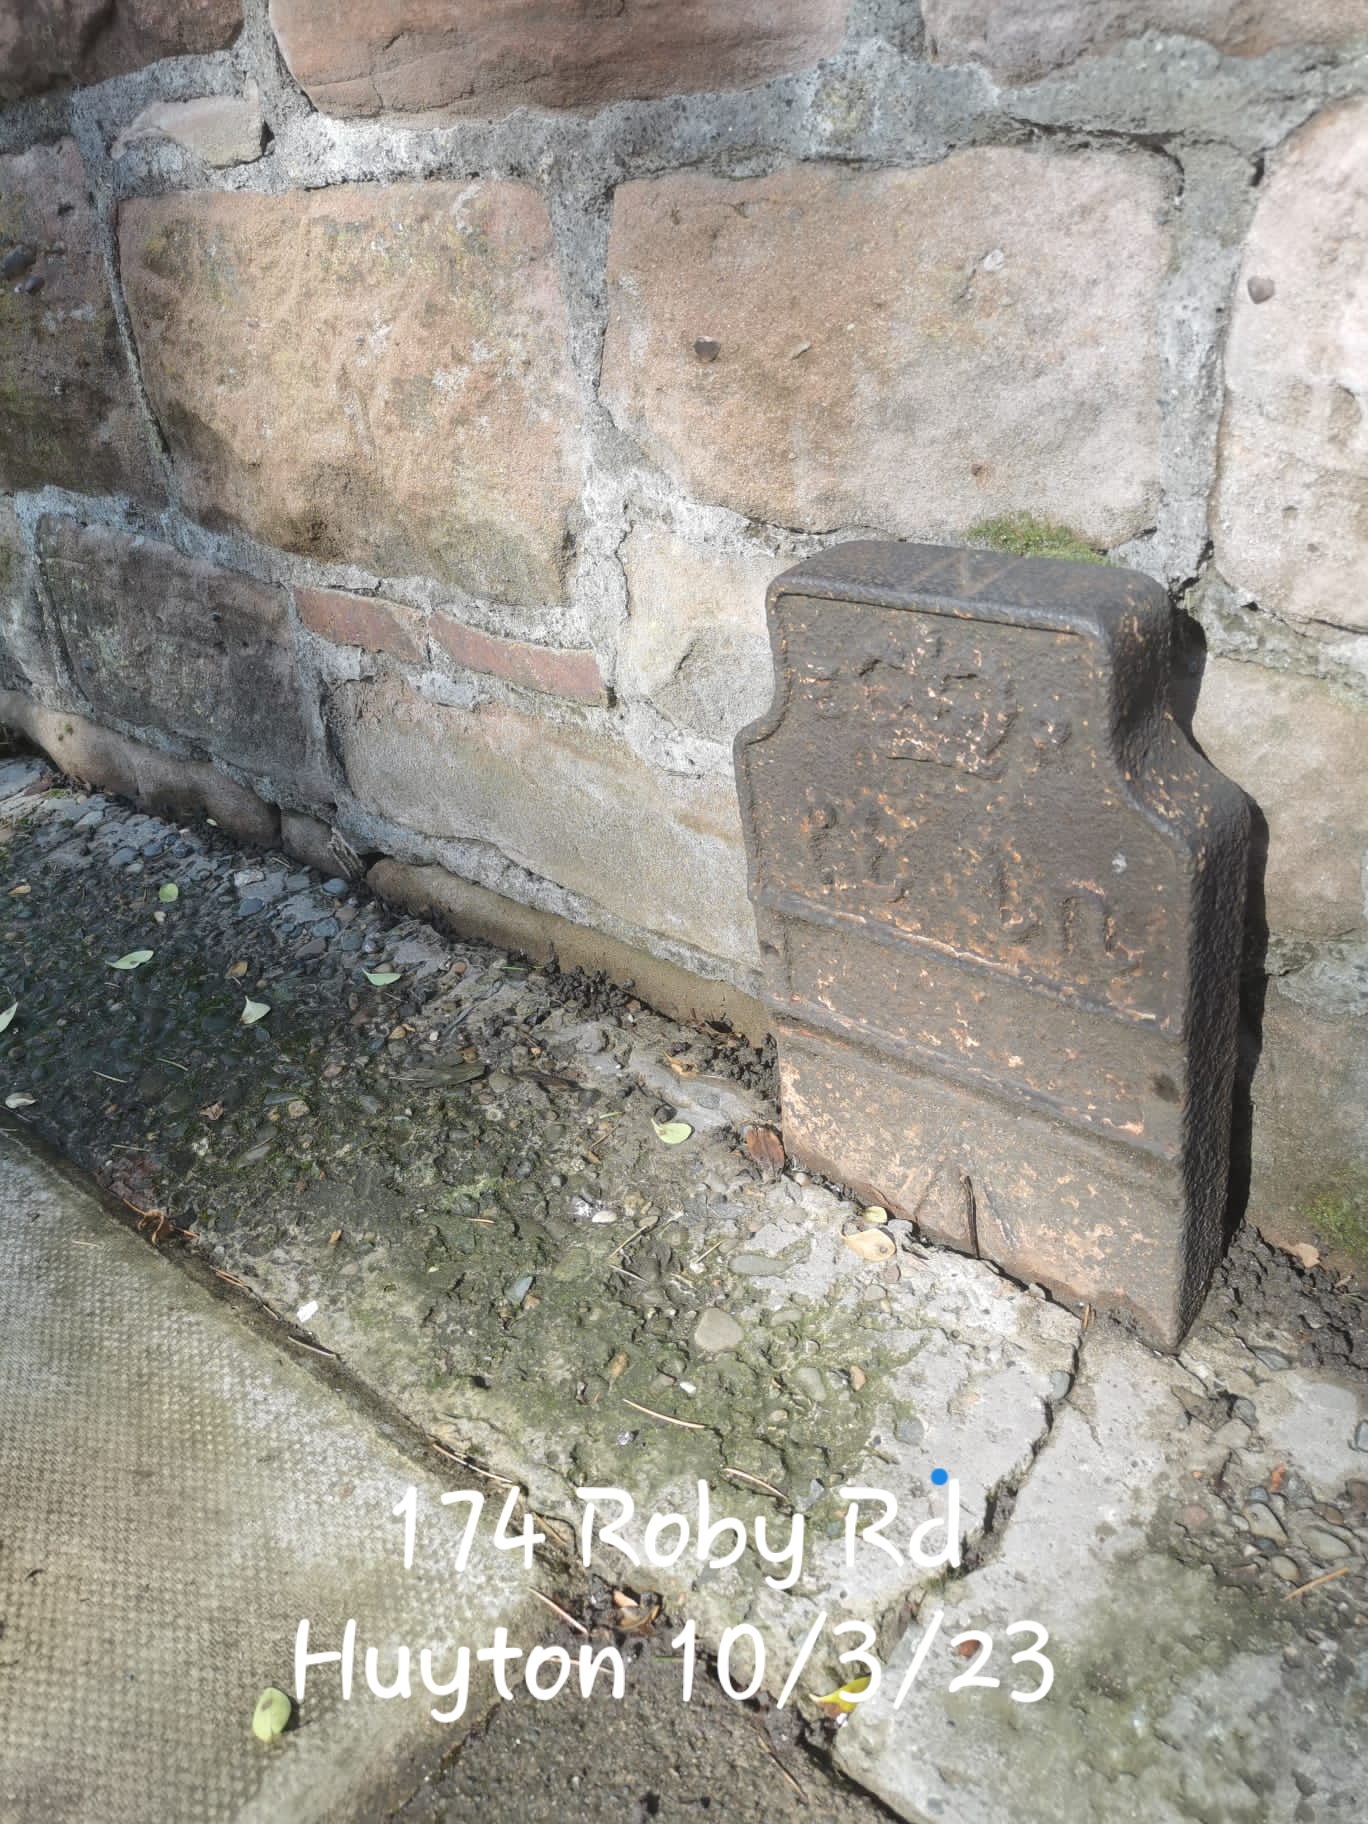 Telegraph cable marker post at 174 Roby Road, Swanside, Liverpool by Jan Gibbons 